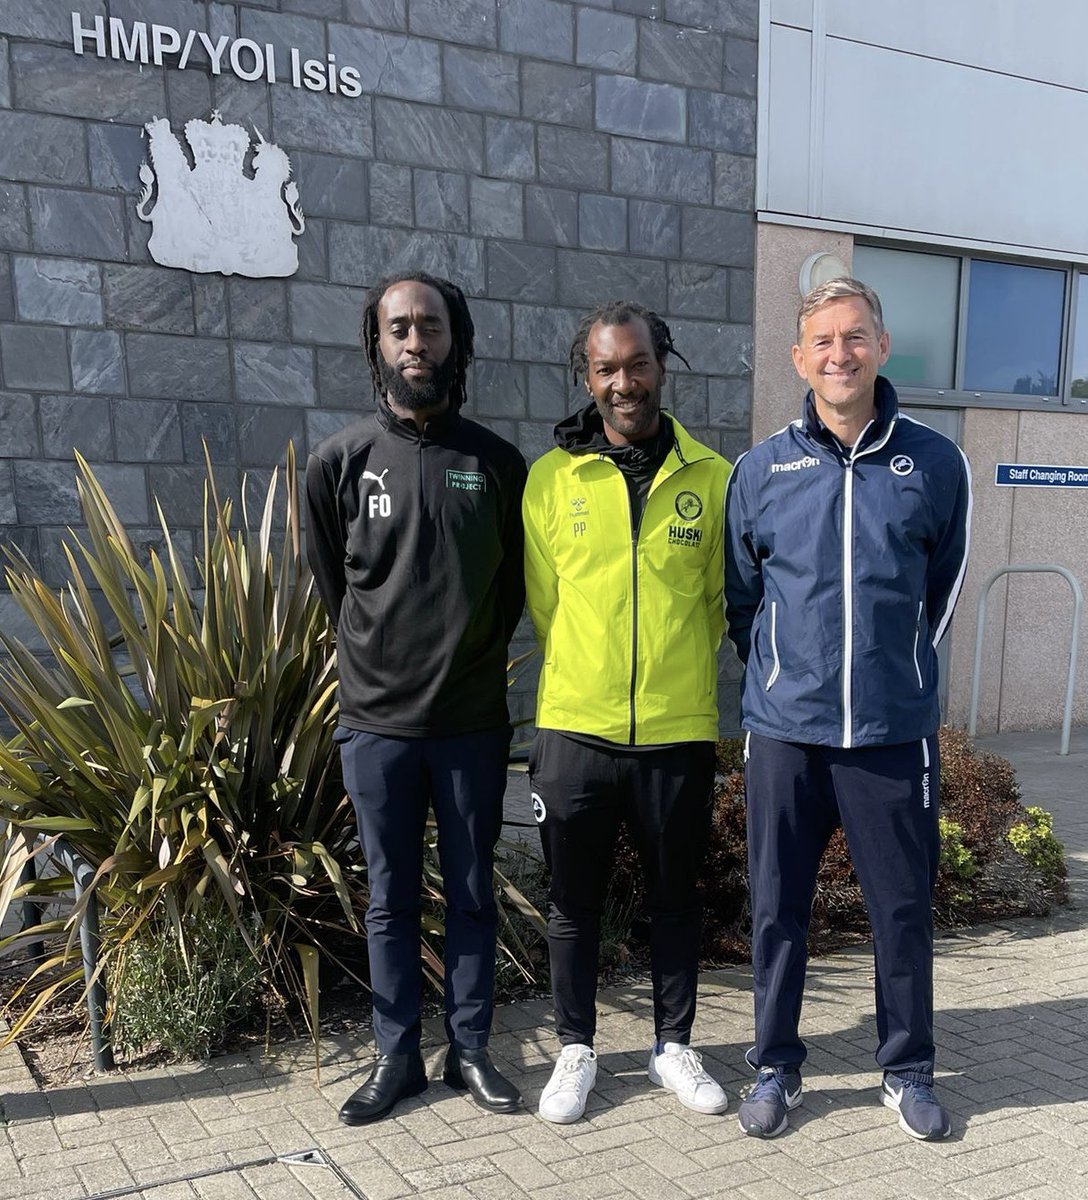 Weekly catch up Tuesday - Thursday Delivery of @ProjectTwinning in @HMPIsis on behalf of @Millwall_MCT Photo; ▪️ Me, my colleague Farhad & Paul Palmer from @MillwallFC supporting the course Thurs morning So many magical moments & evidence that we can affect behaviour change